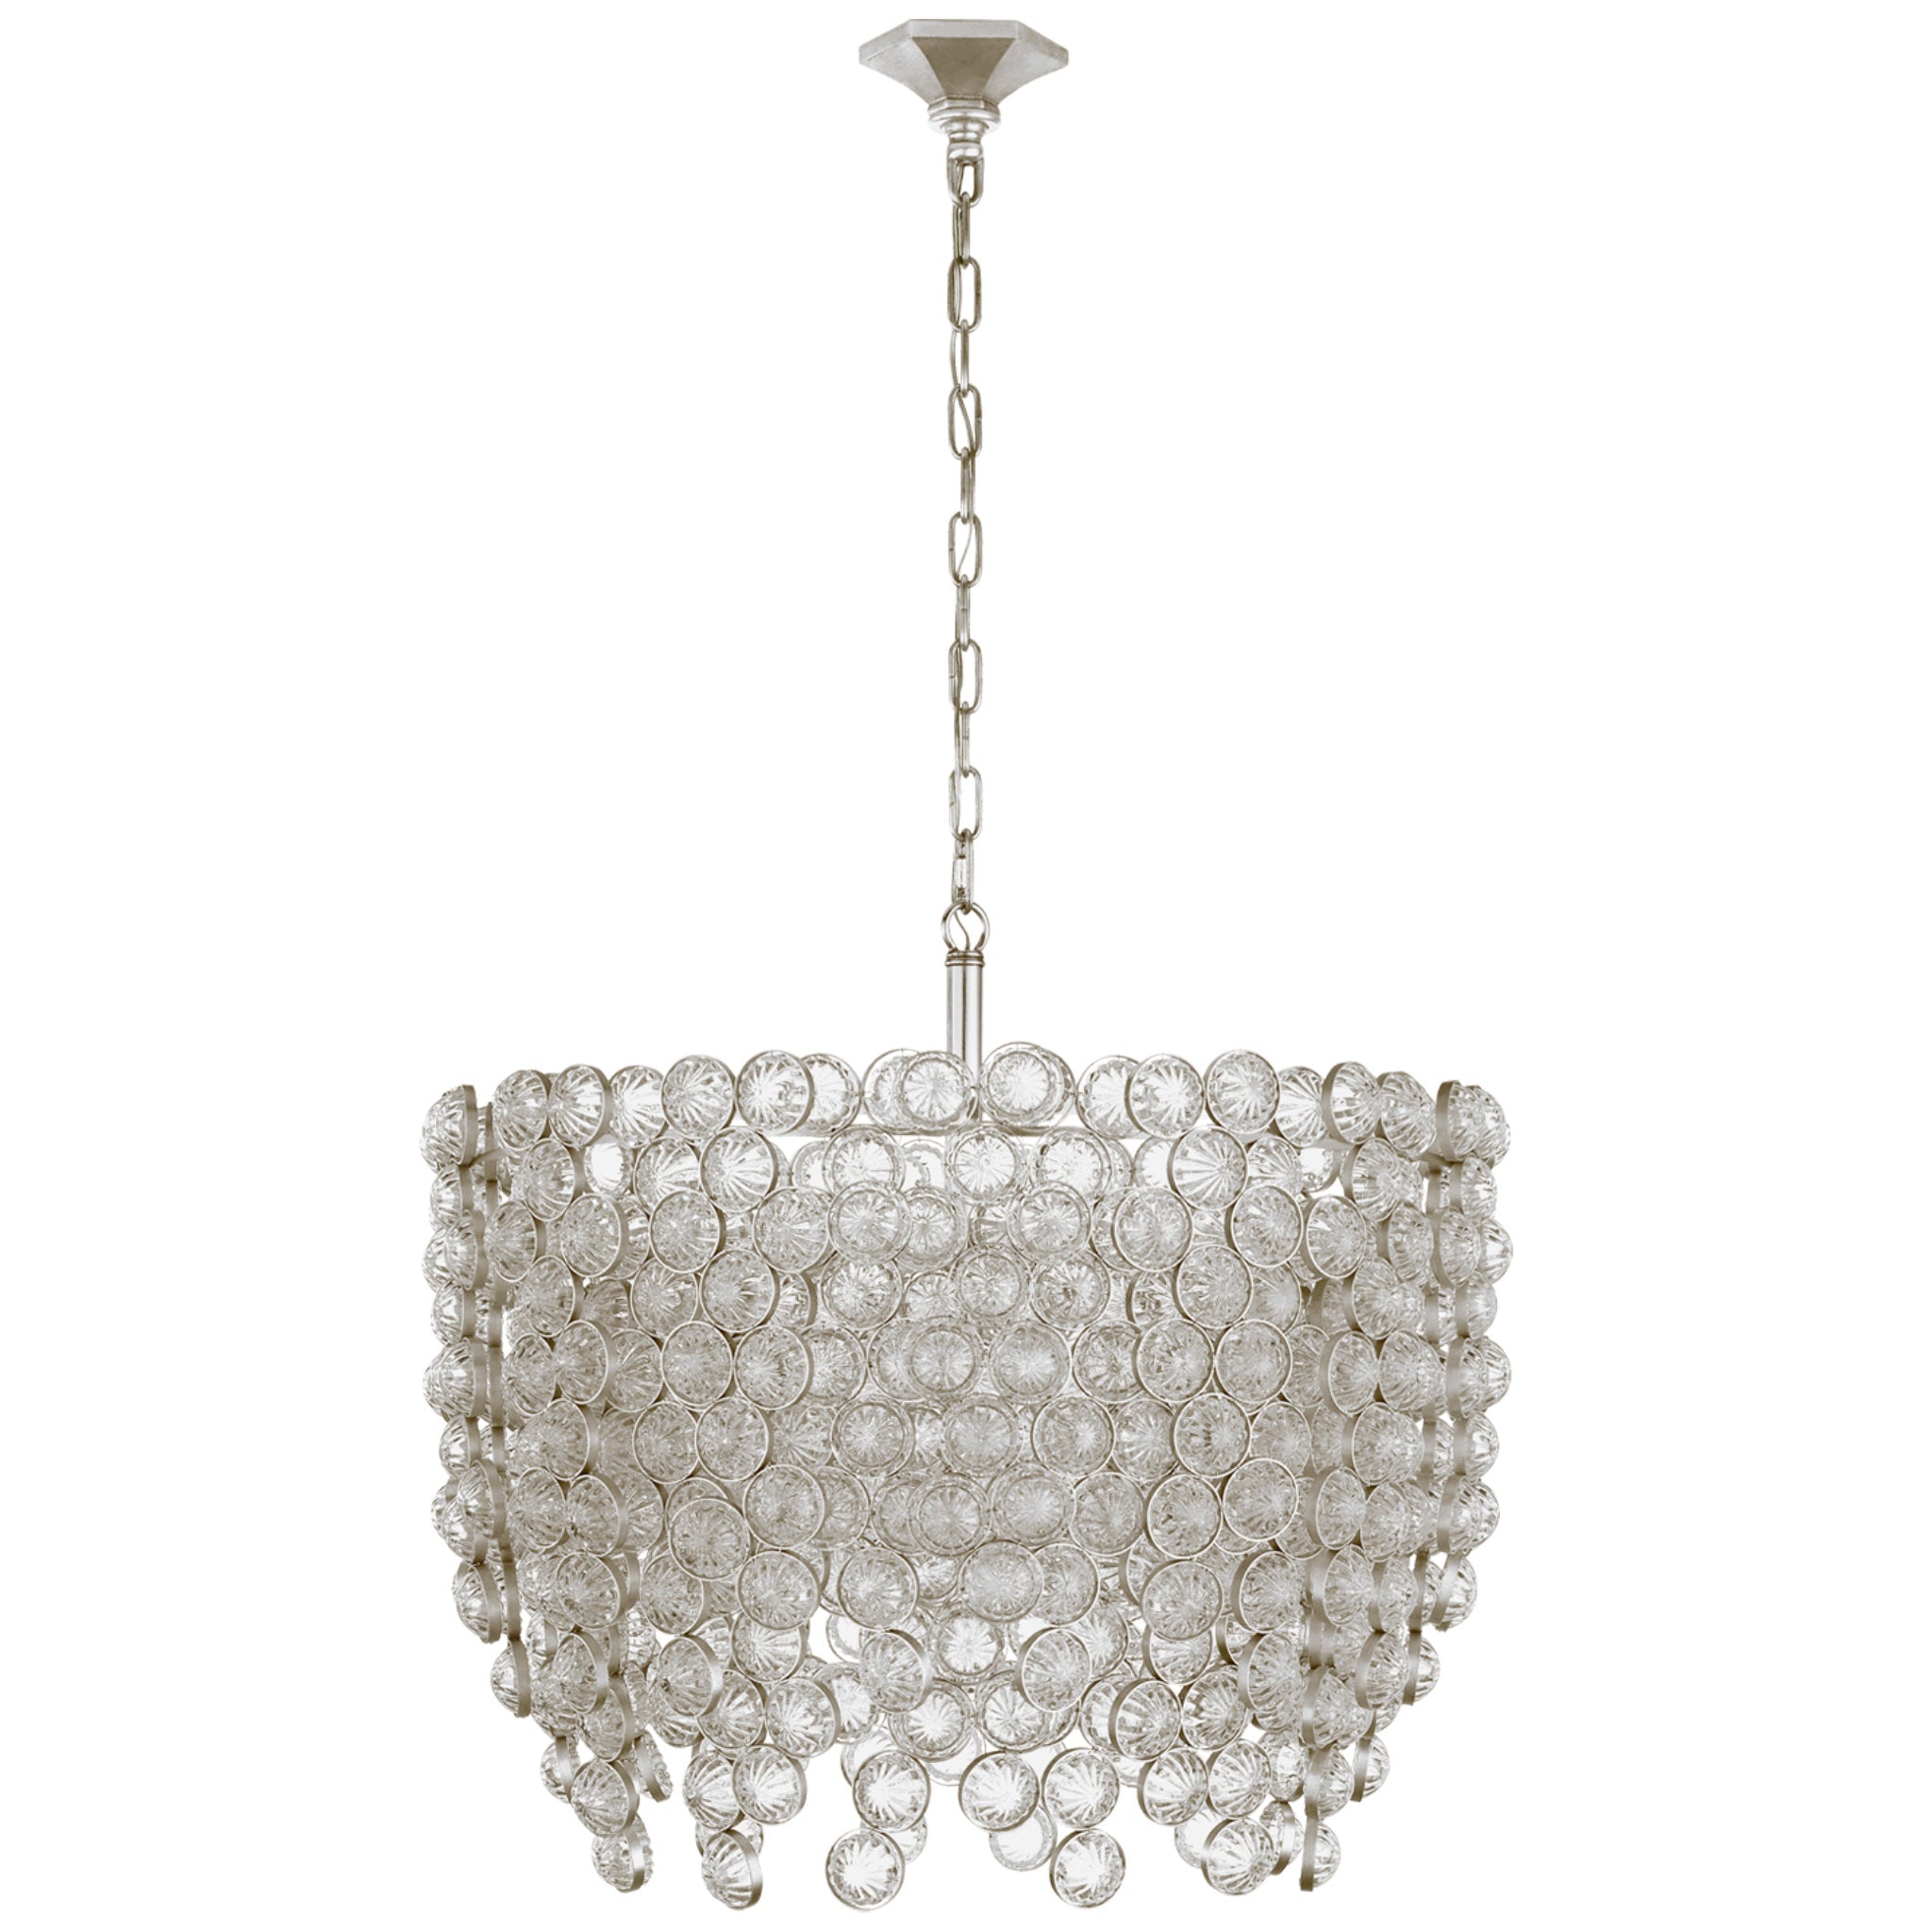 Julie Neill Milazzo Medium Waterfall Chandelier in Burnished Silver Leaf and Crystal